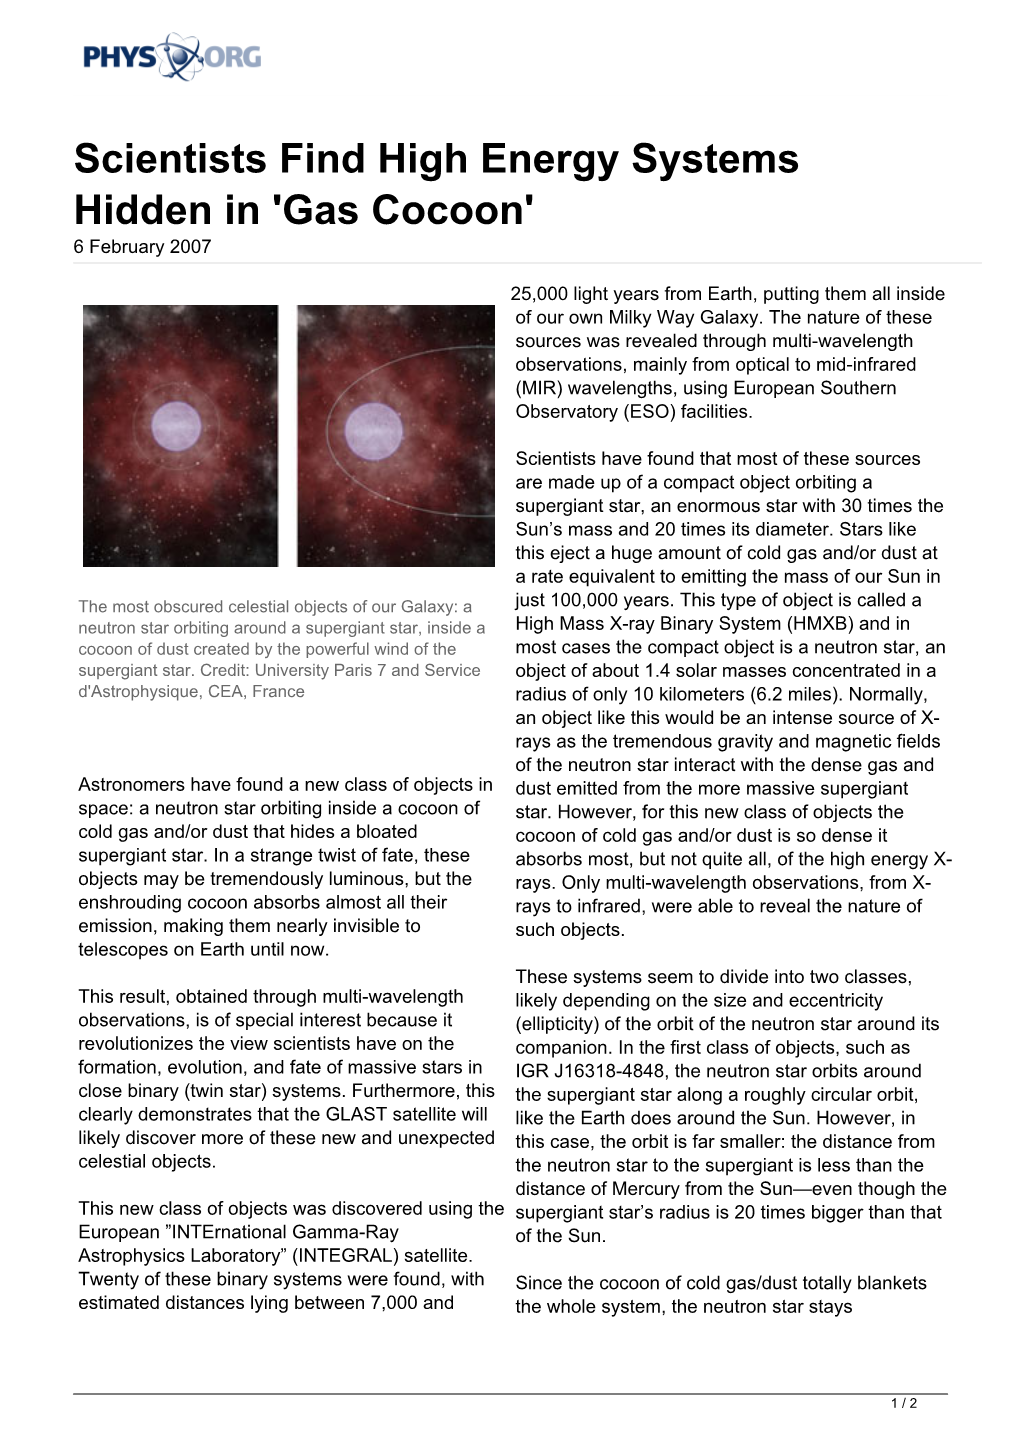 Scientists Find High Energy Systems Hidden in 'Gas Cocoon' 6 February 2007